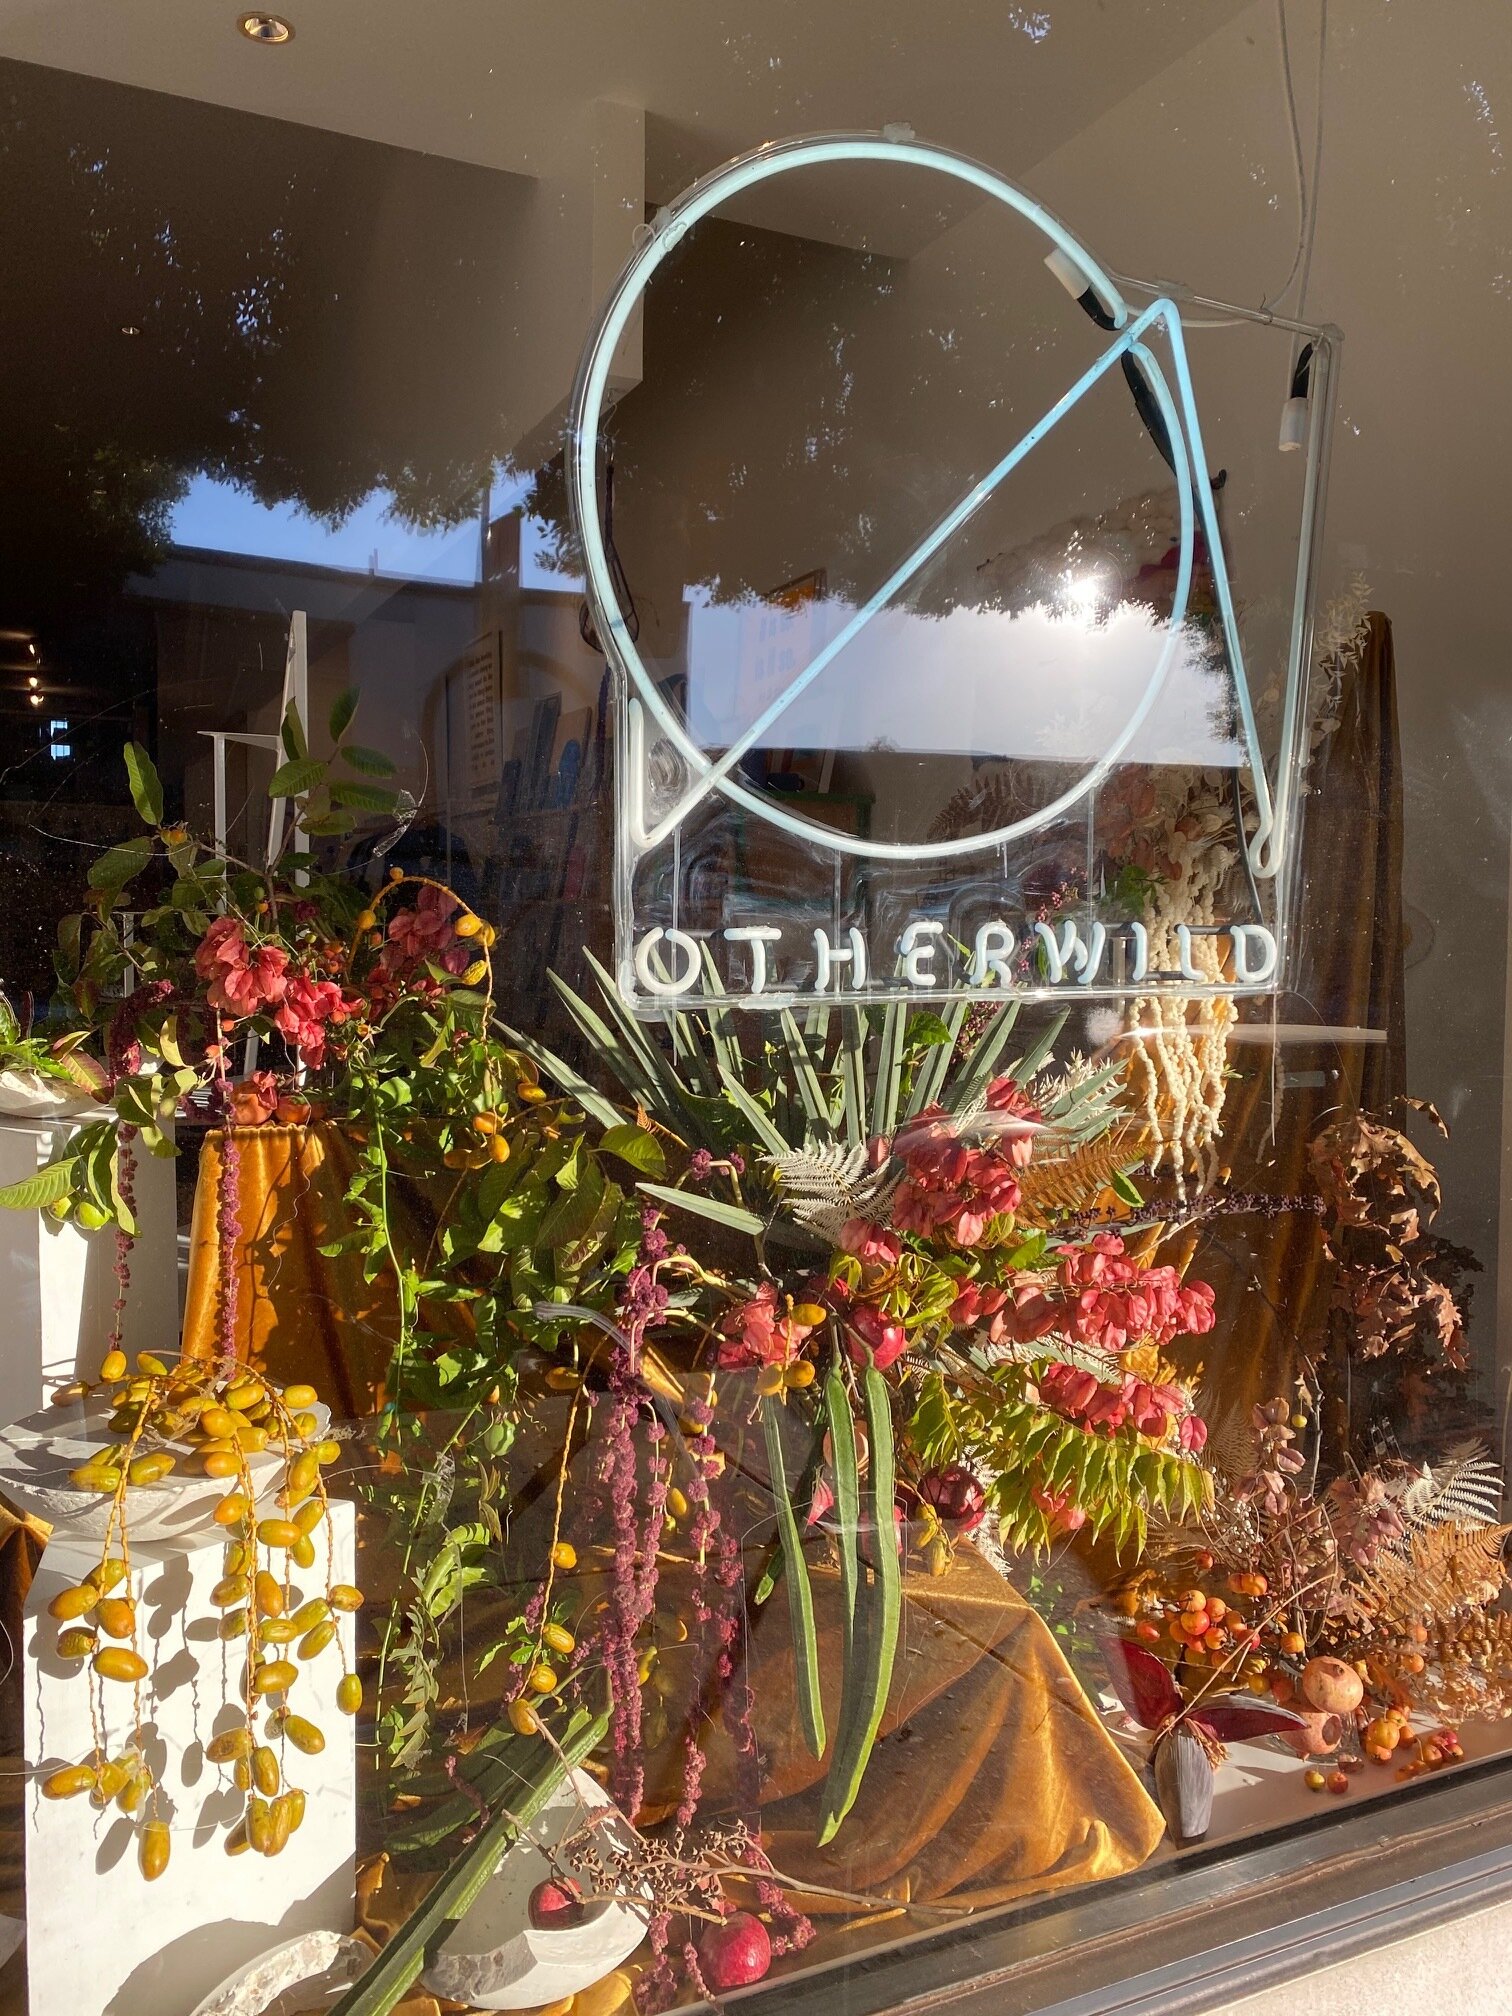  California Winter at Otherwild as Window Artist-in-Residence Winter 2019/2020 